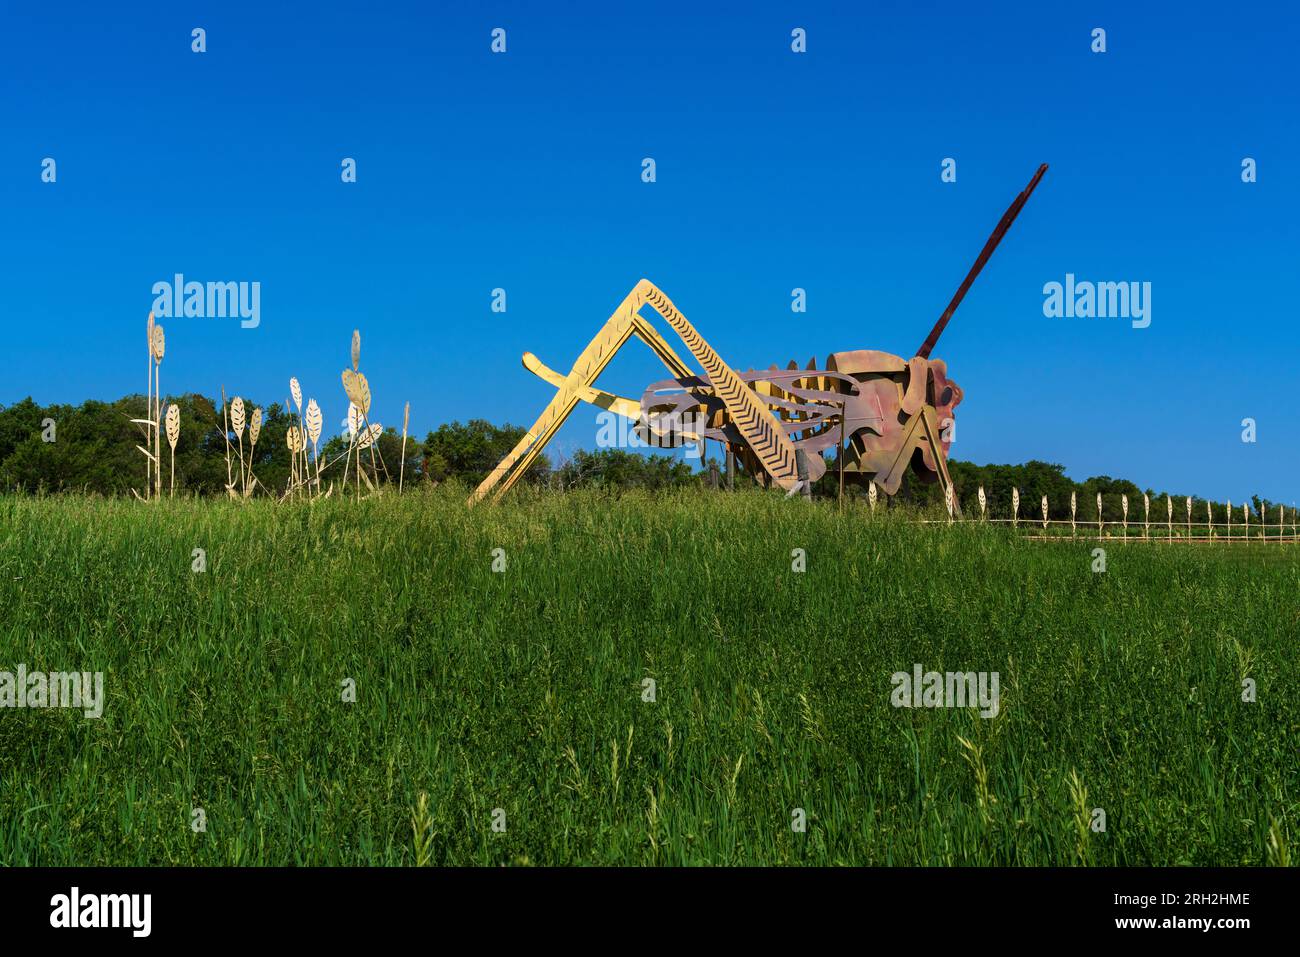 Grasshoppers in the Field sculpture on North Dakota’s Enchanted Highway Stock Photo